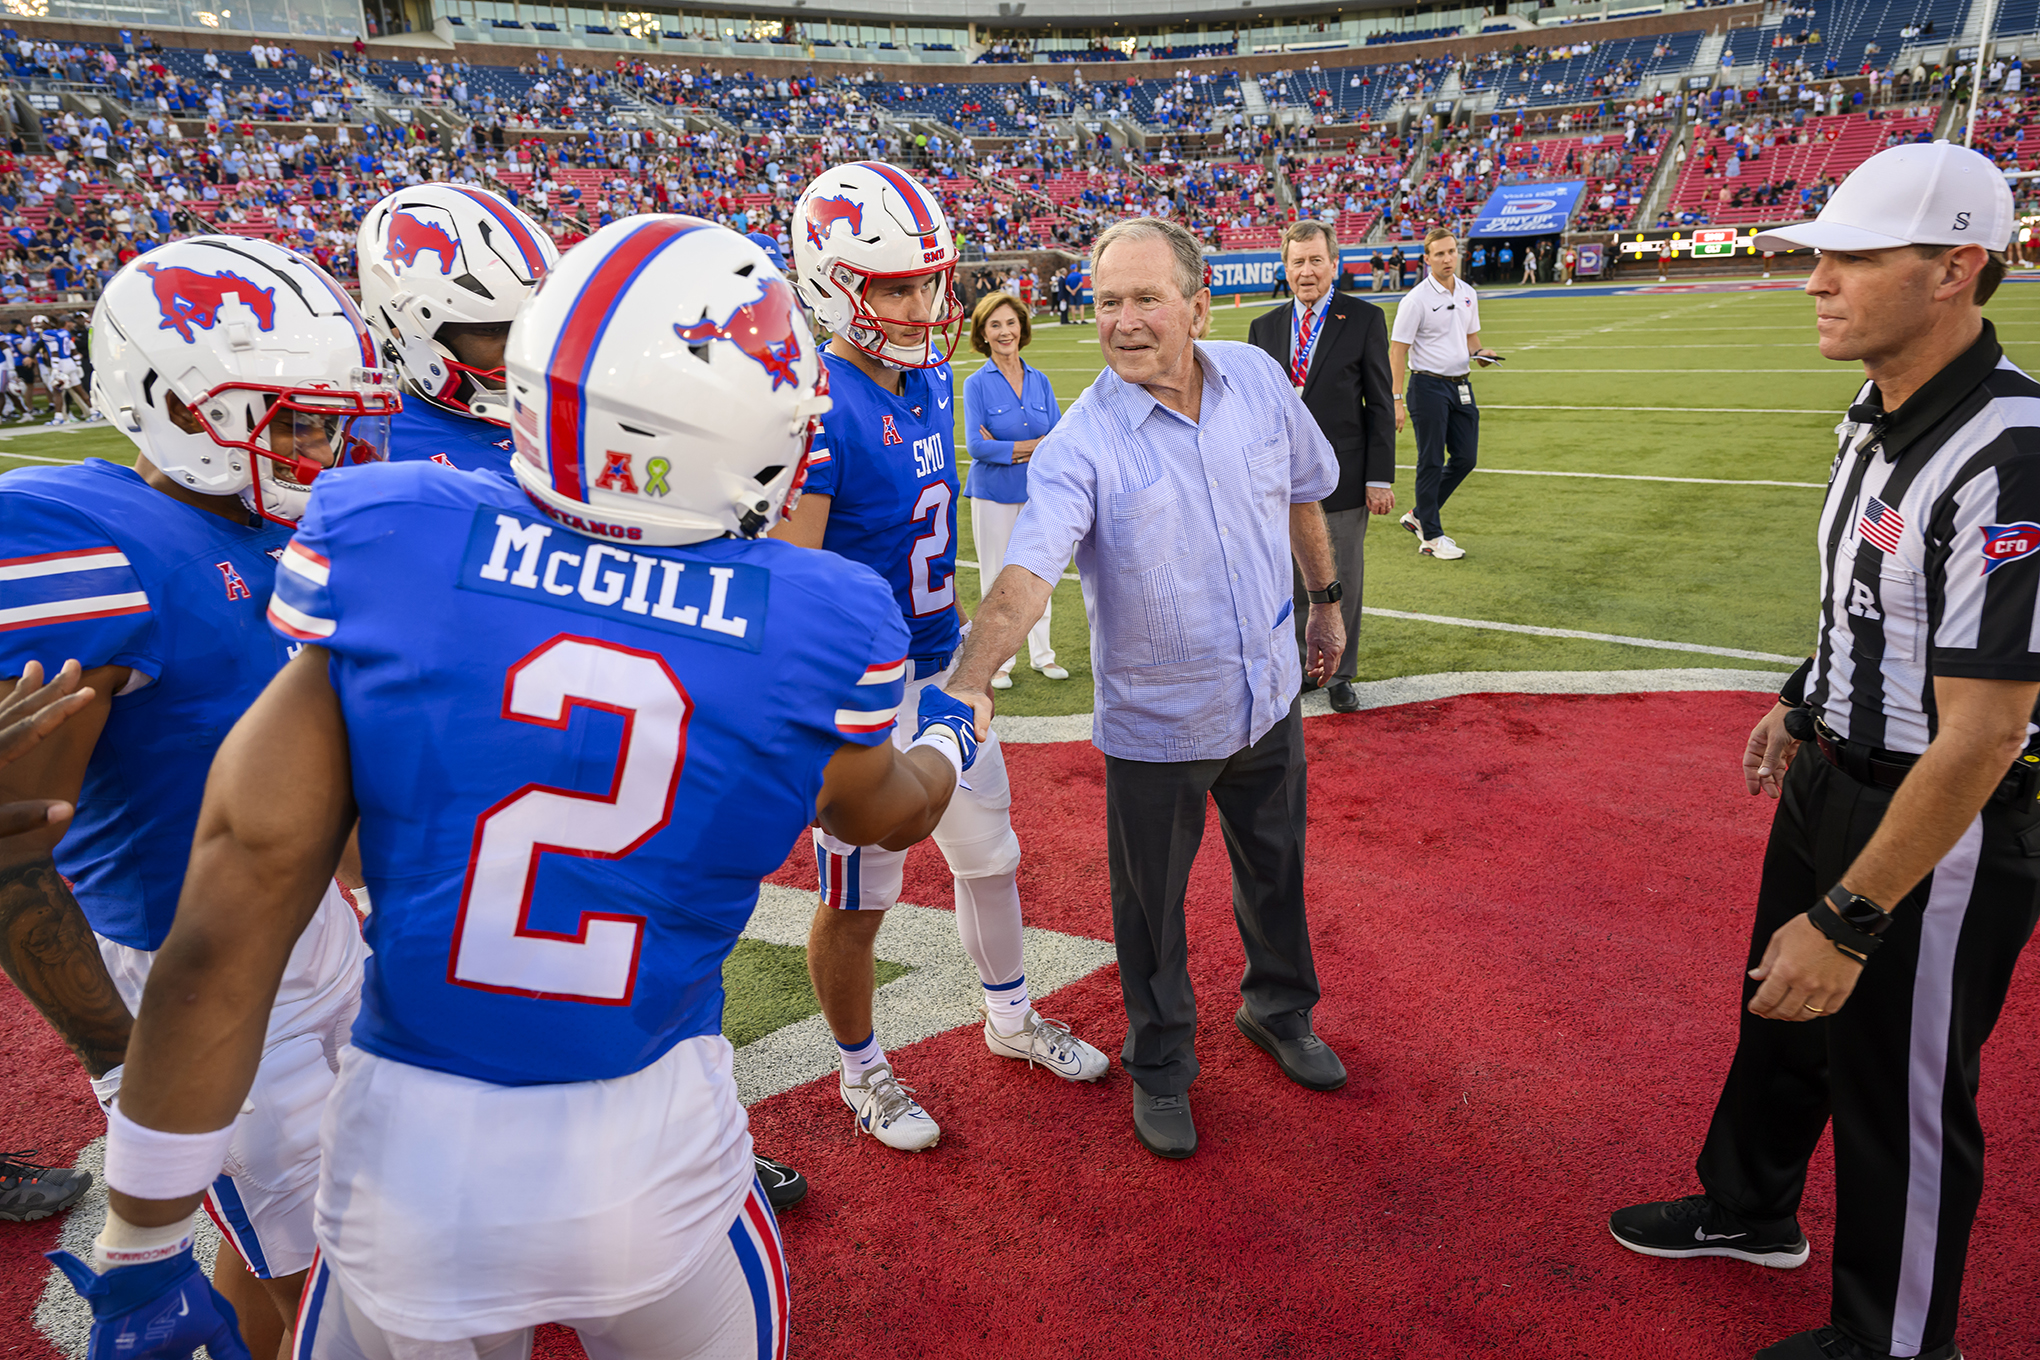  Pres. George W. Bush shakes hands with SMU football players before coin toss